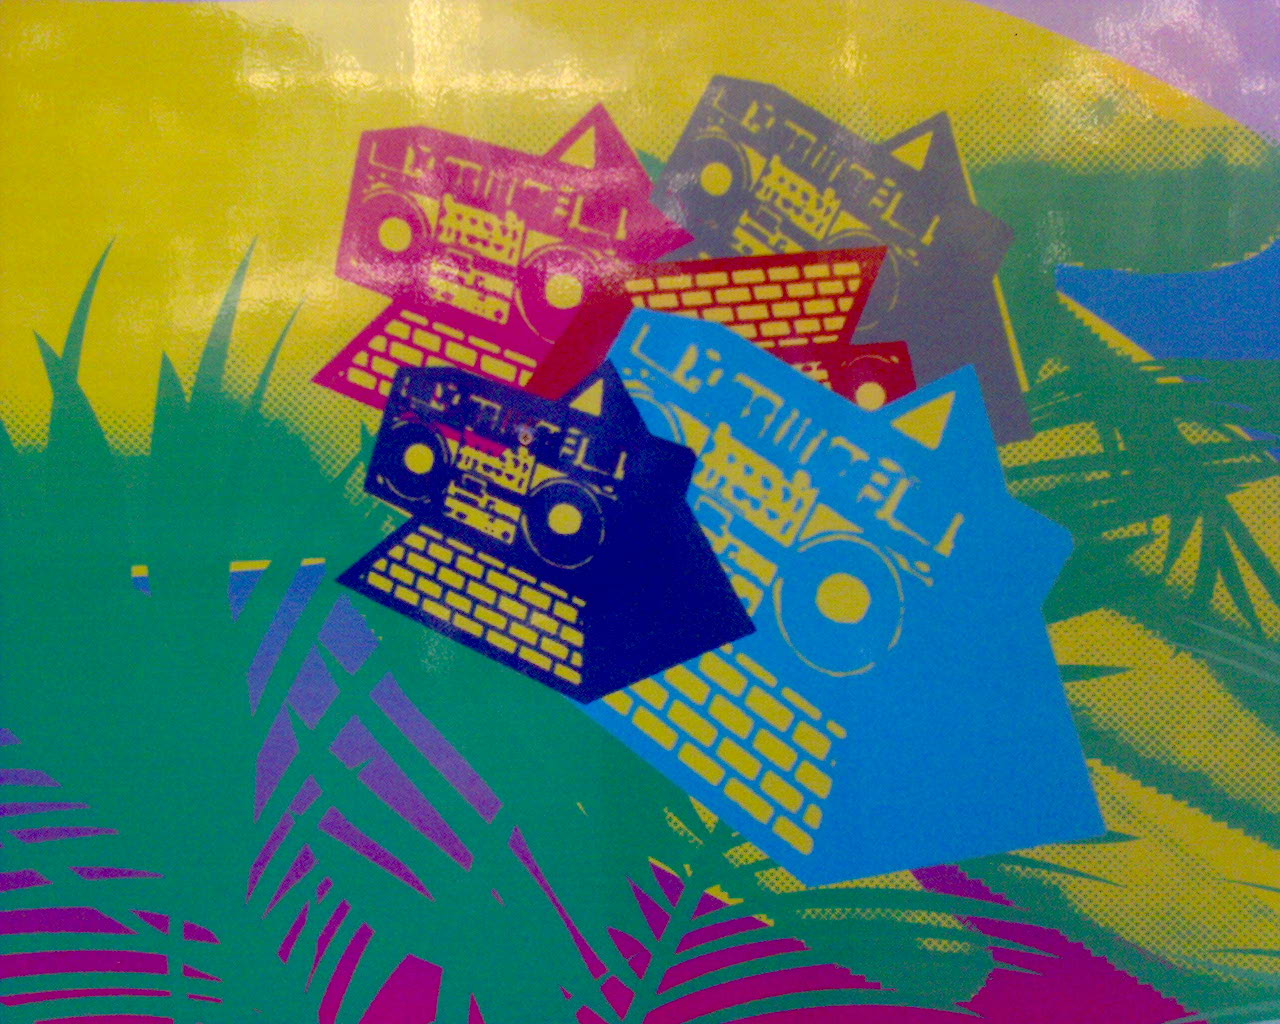 Photo of a hoarding with violently coloured screen prints of the KLF beatbox-pyramid logo on a background of palm fronds